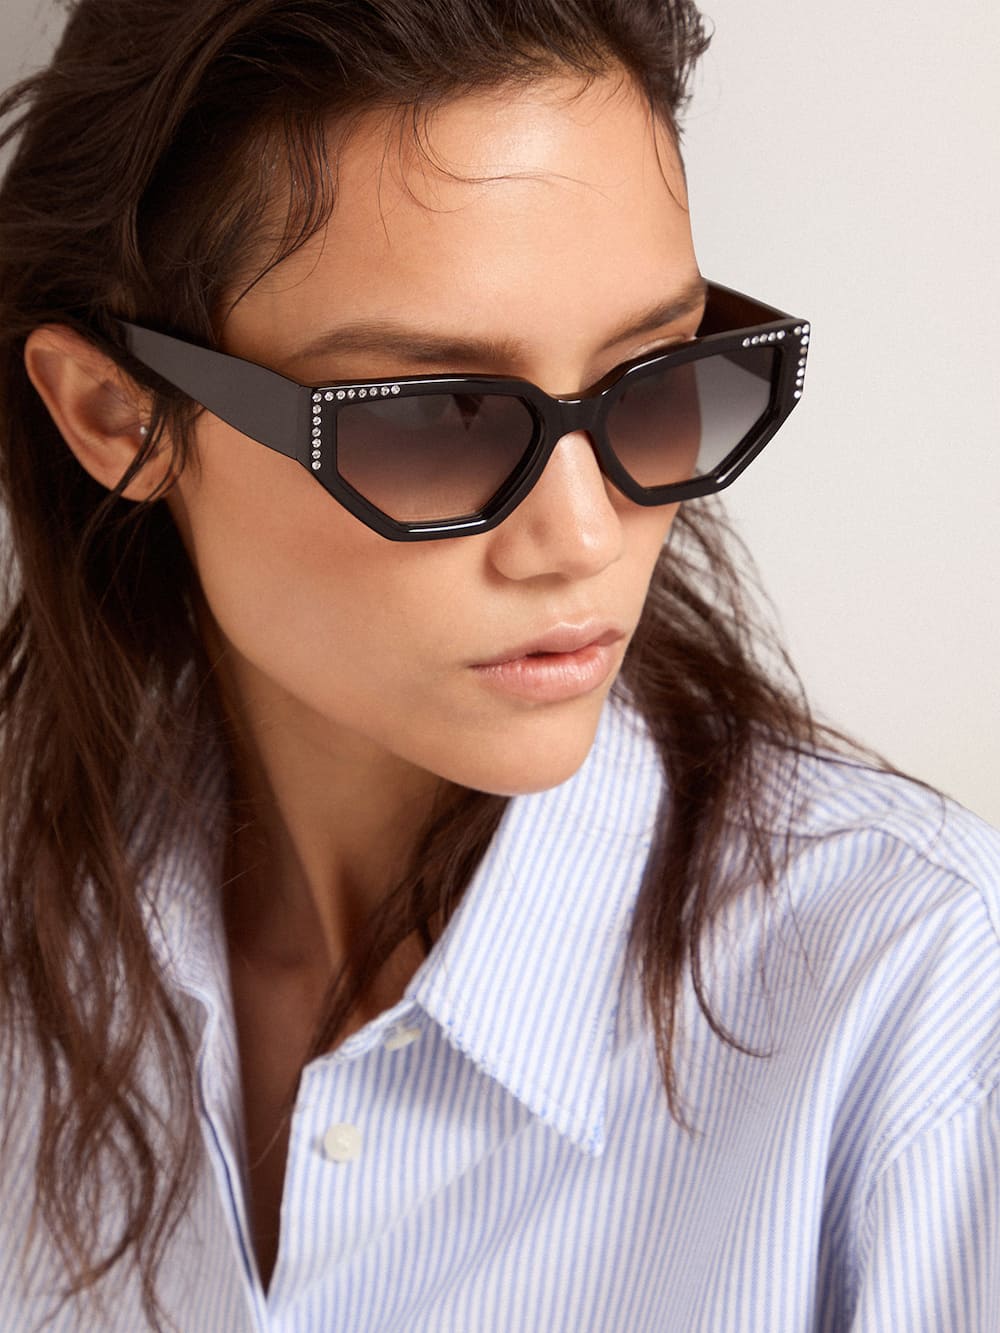 Golden Goose - Sunglasses rectangular model with black frame and crystals in 